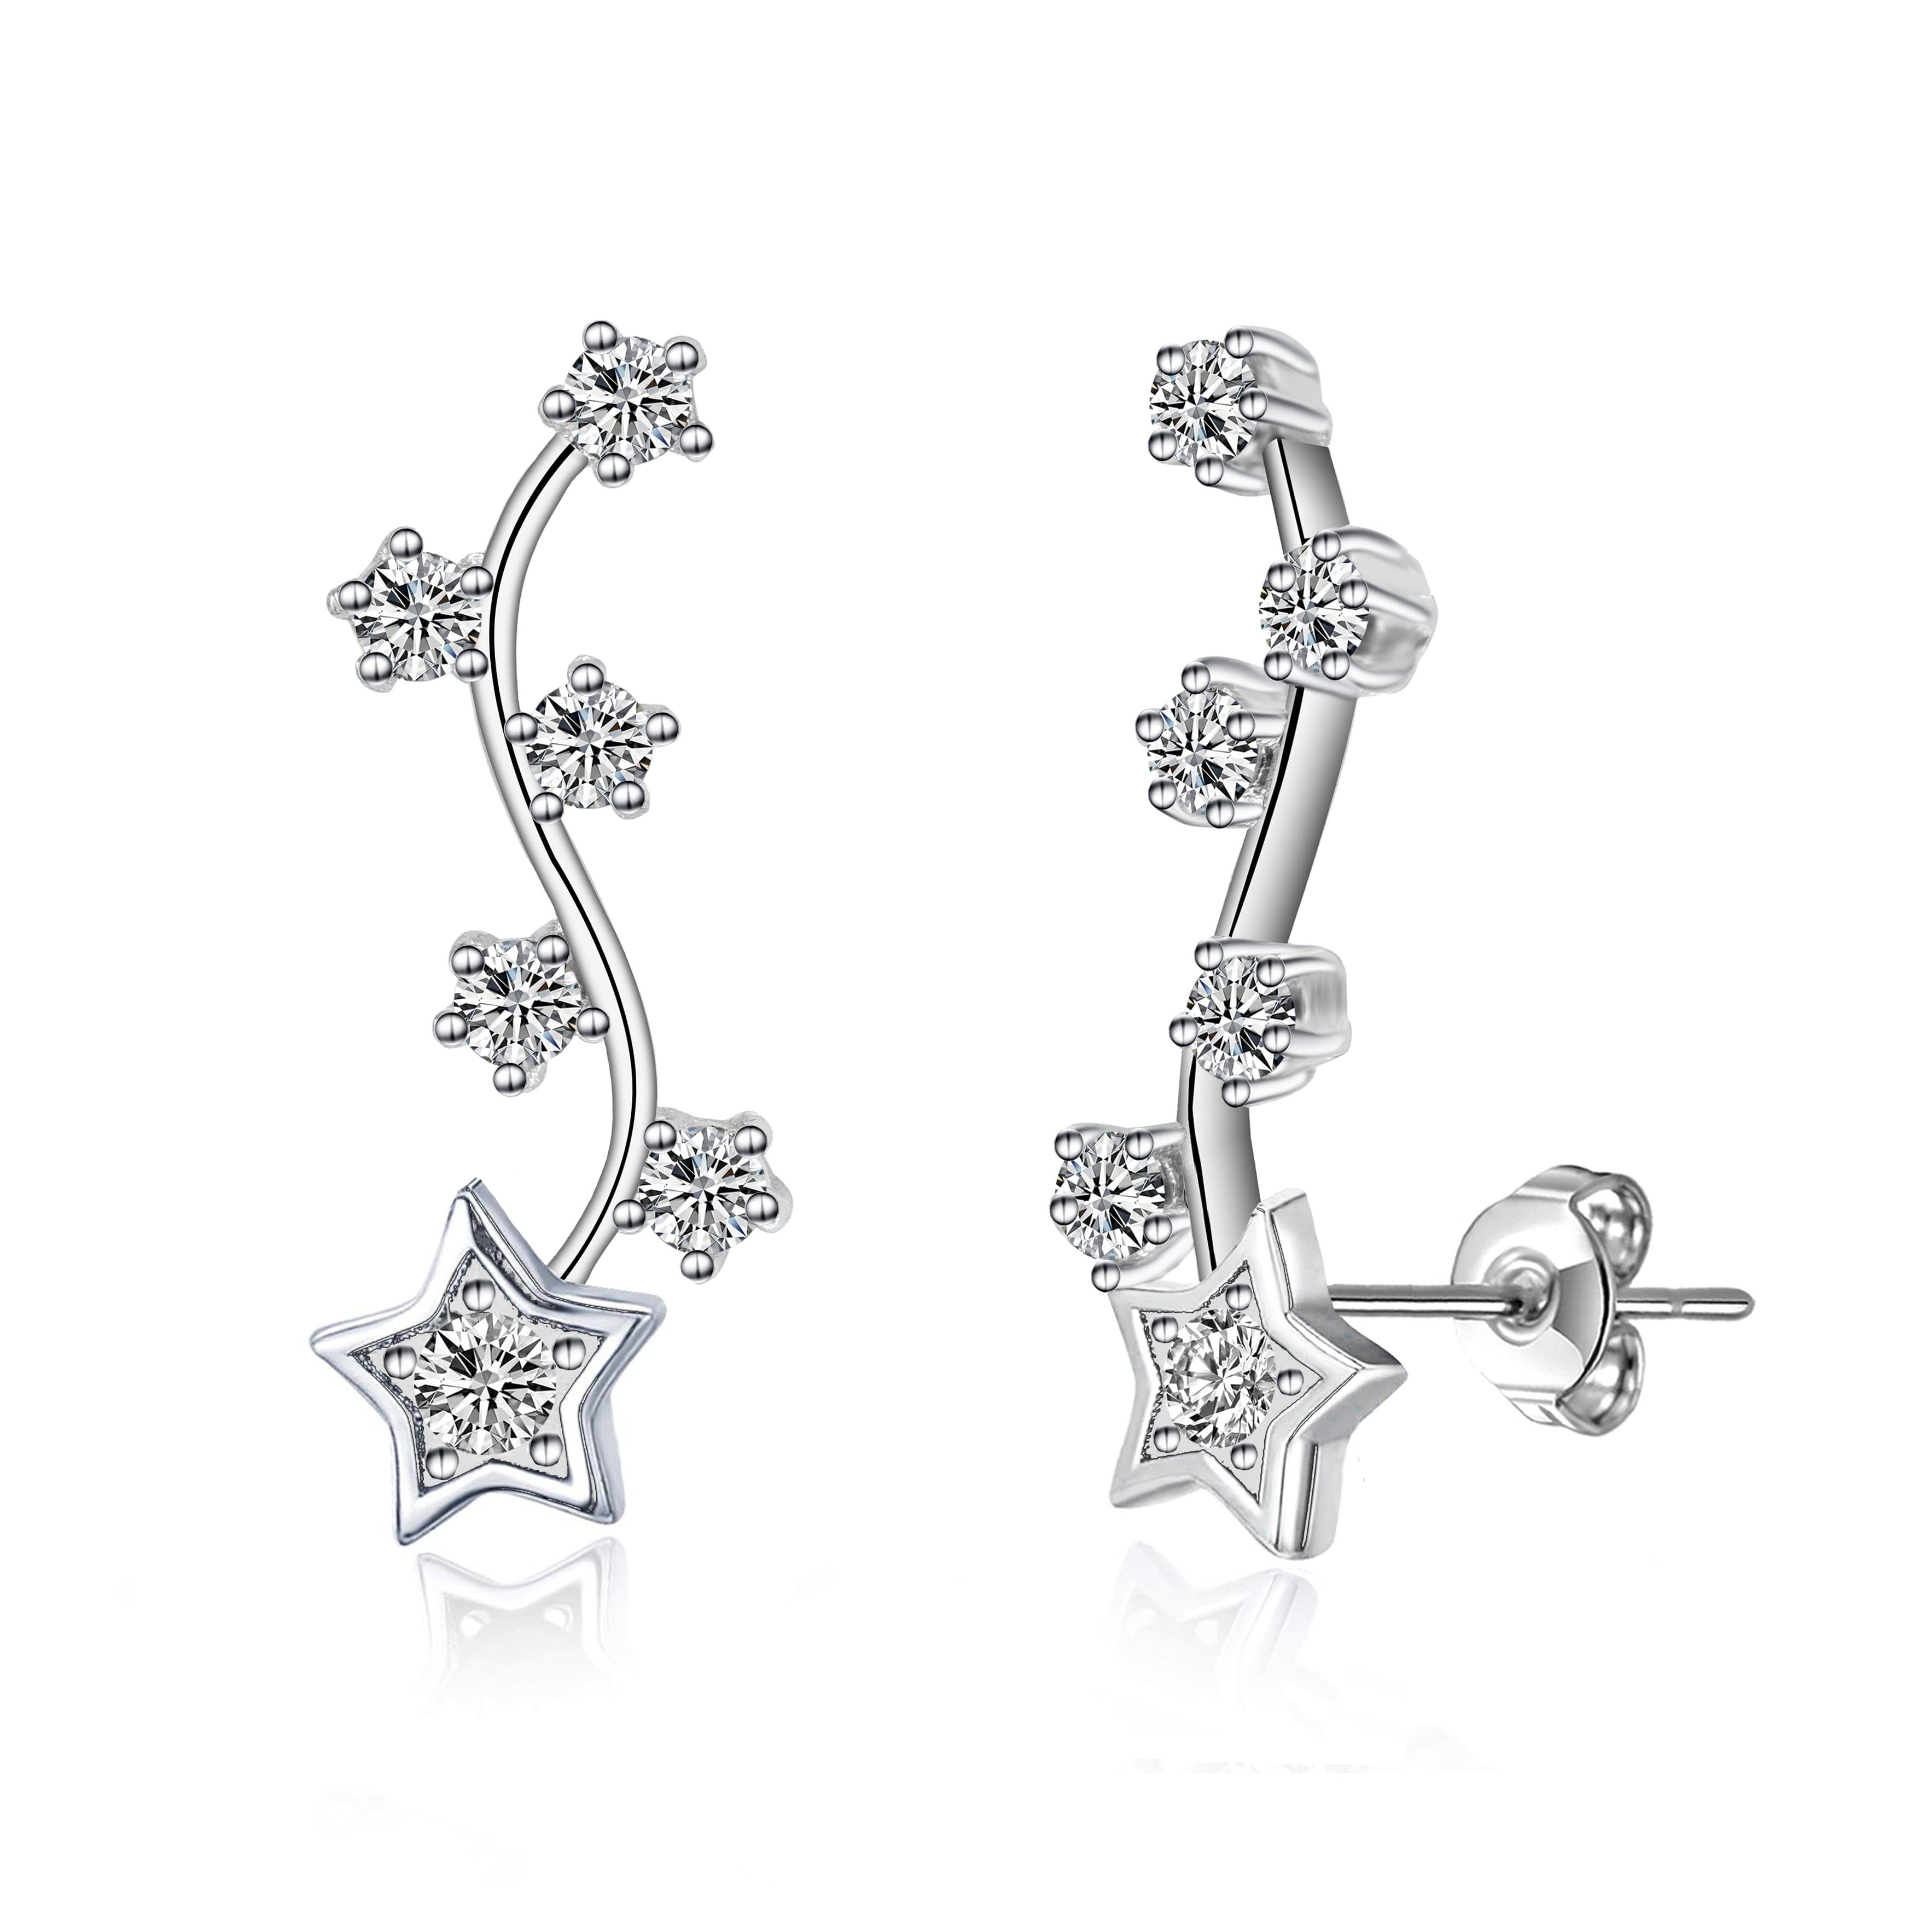 Silver Plated Star Climber Earrings Created with Zircondia® Crystals by Philip Jones Jewellery